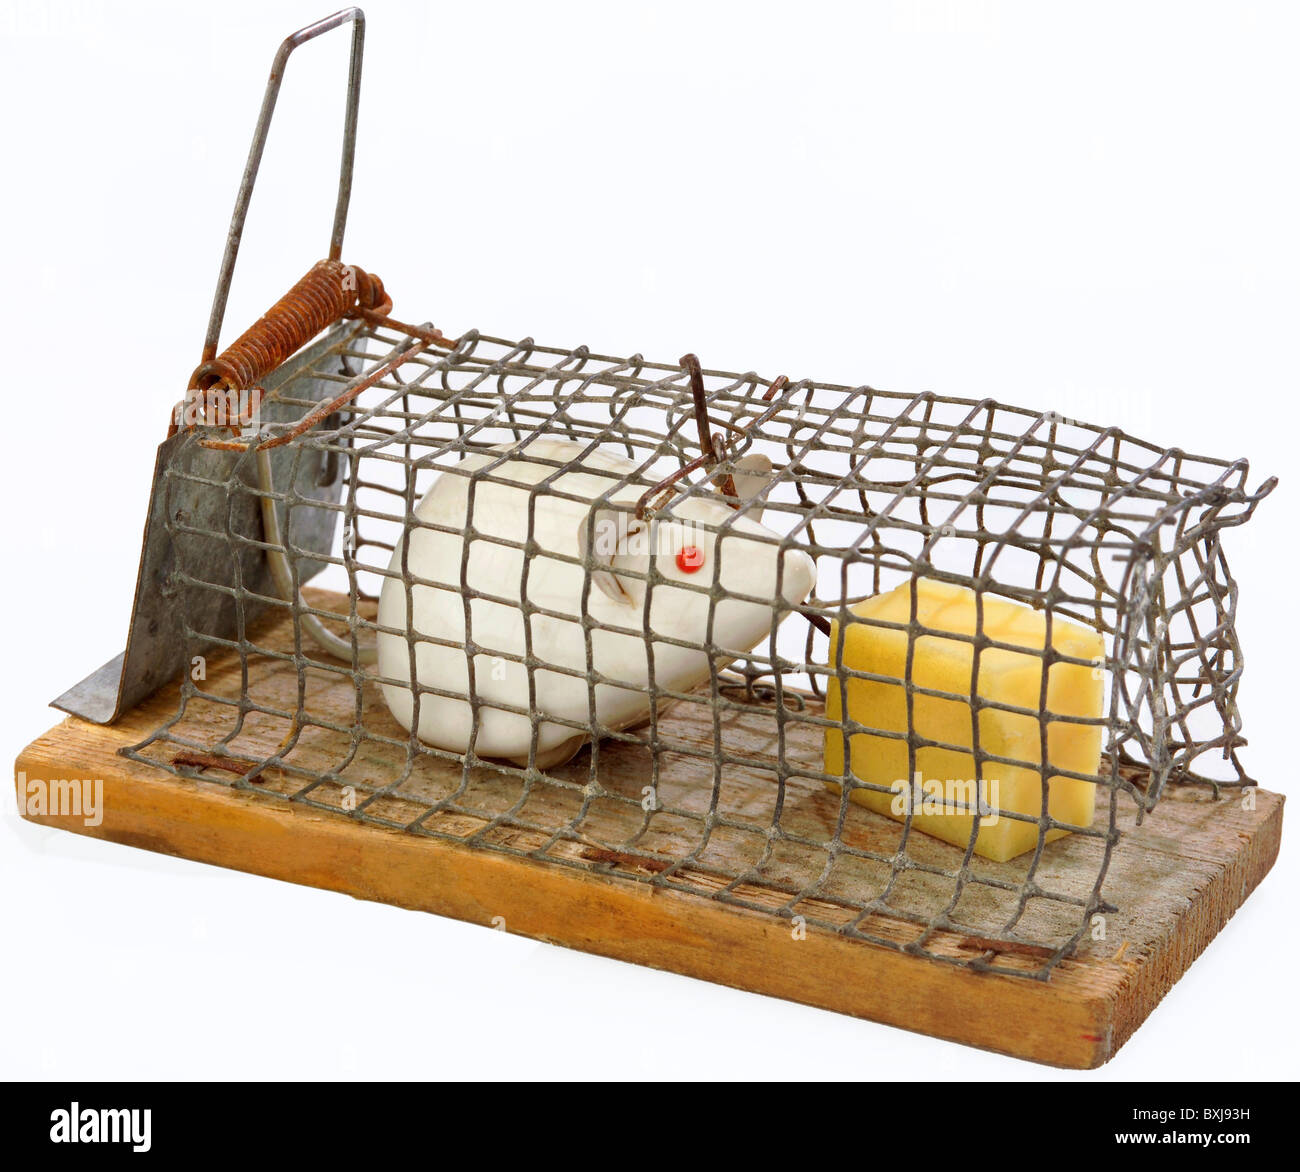 https://c8.alamy.com/comp/BXJ93H/household-kitchen-and-kitchenware-mousetrap-germany-circa-1955-additional-BXJ93H.jpg